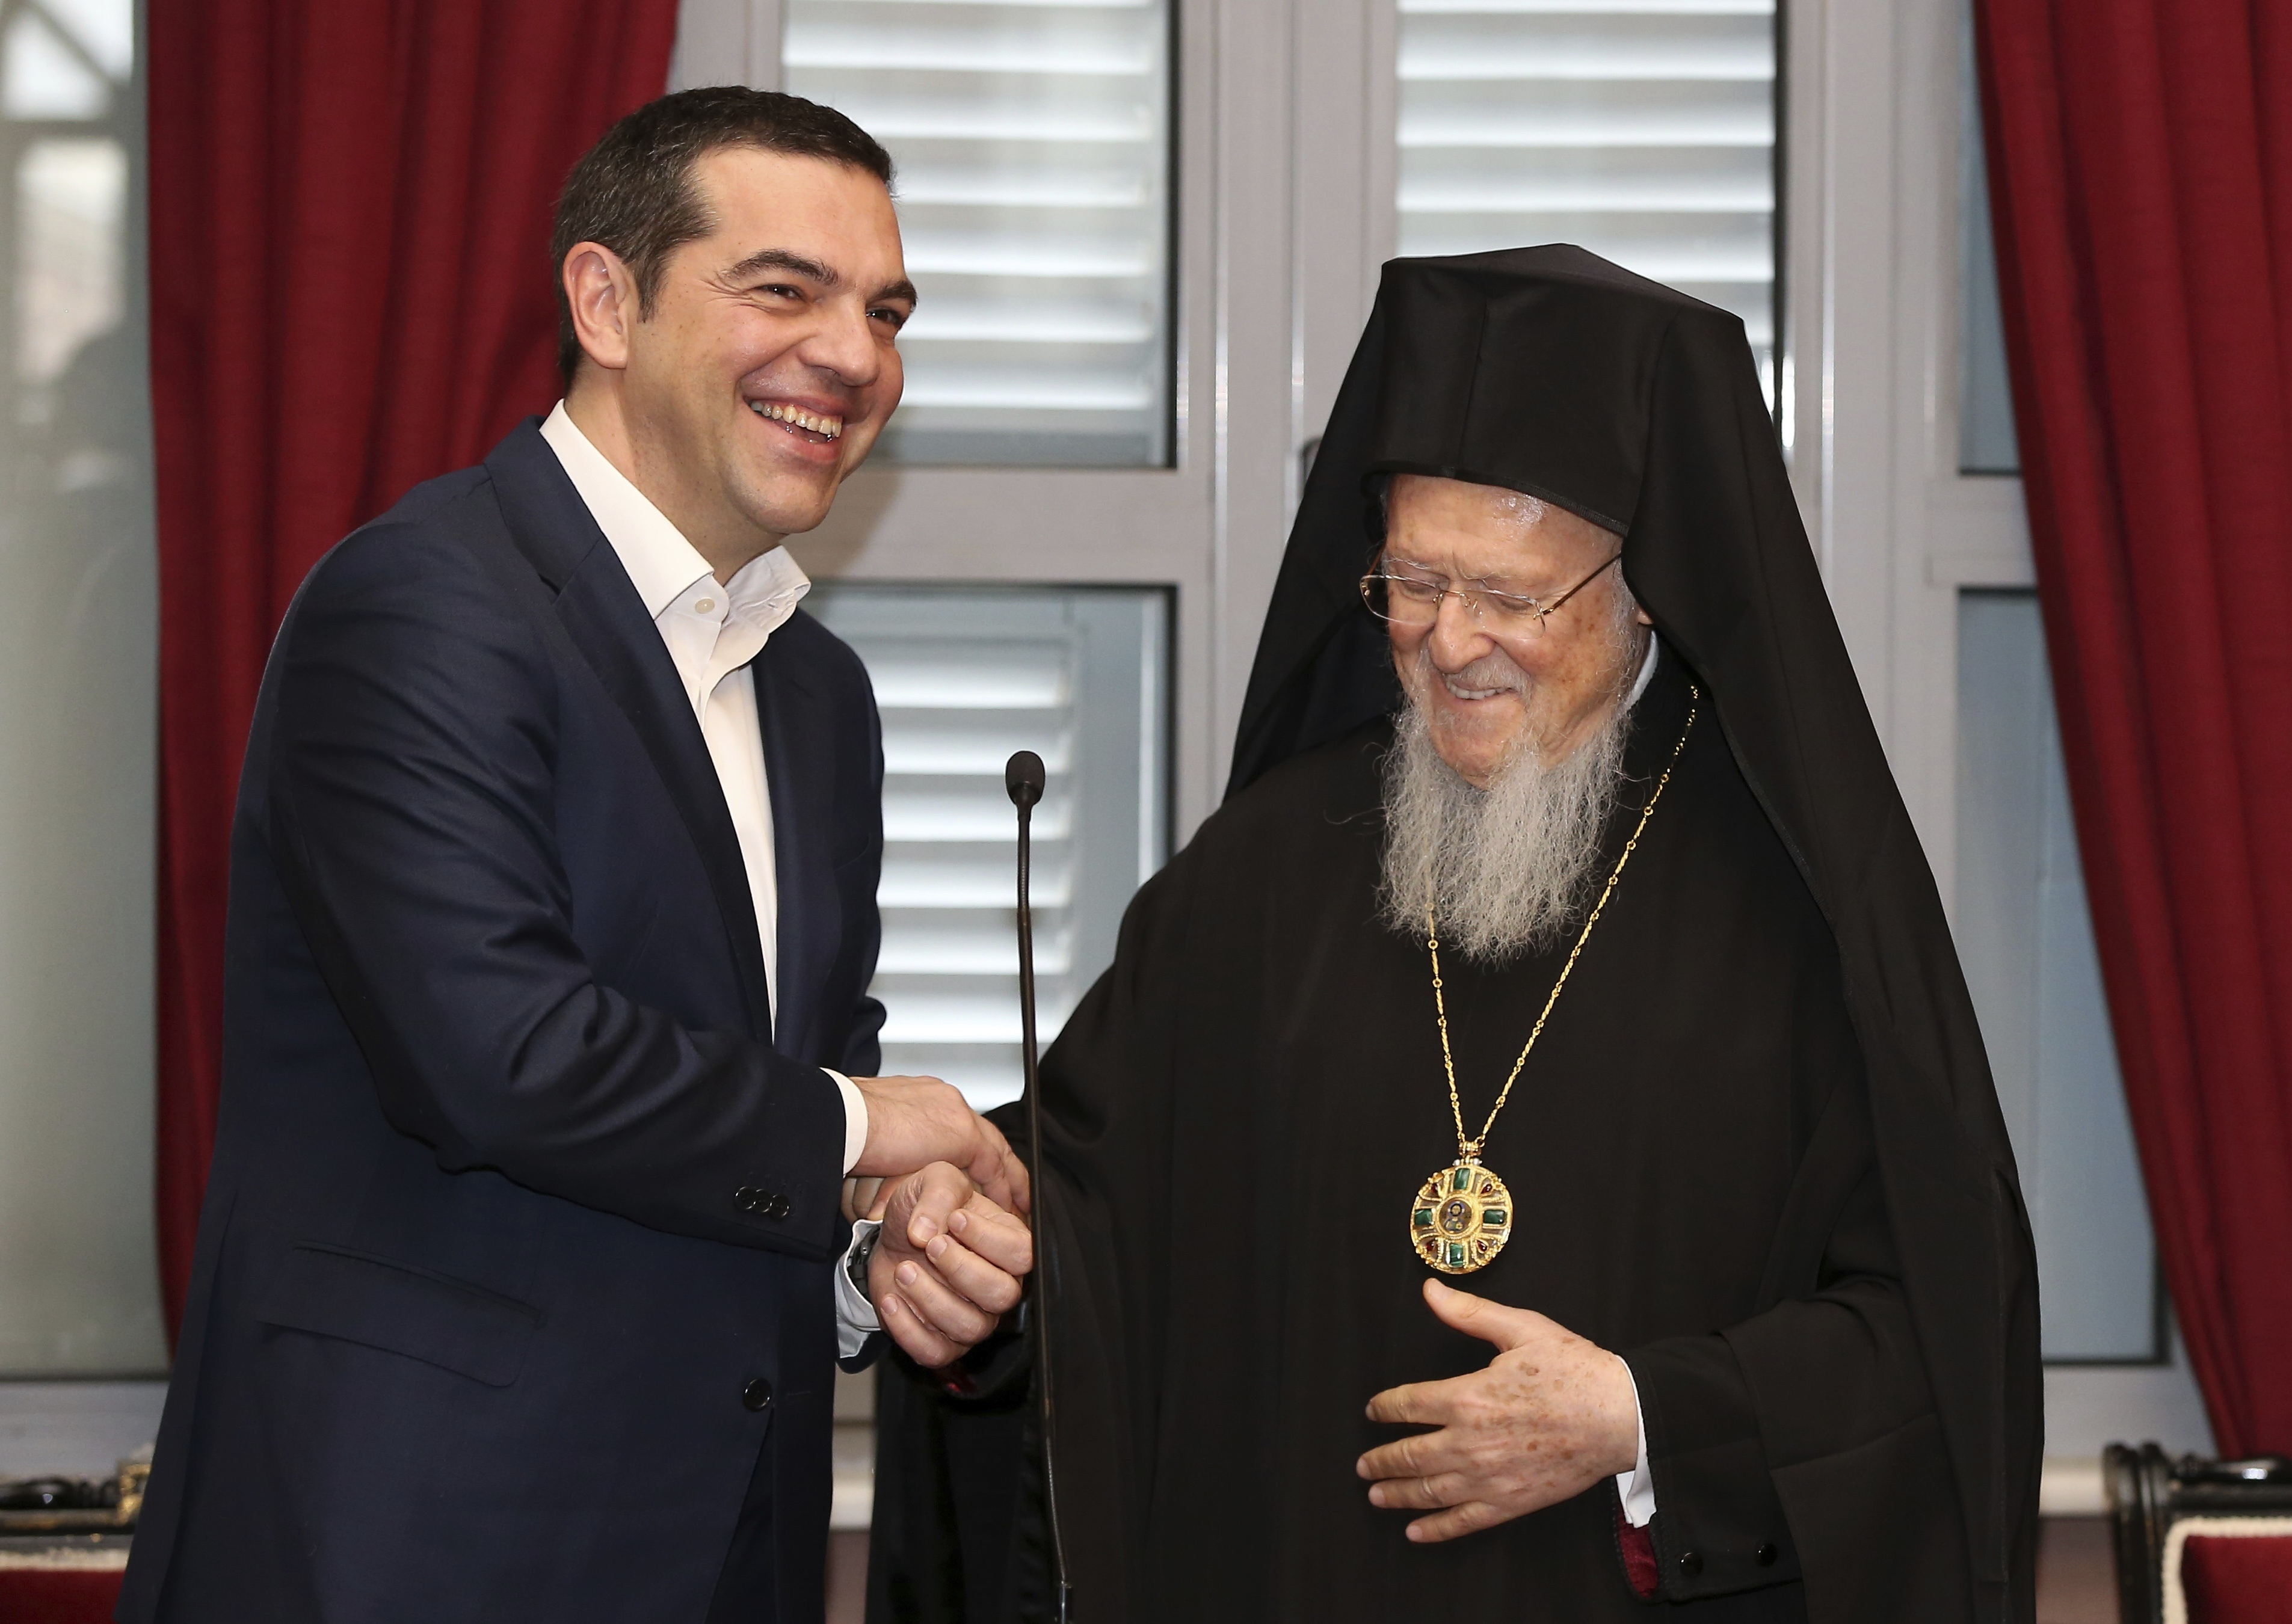 Greece's Prime Minister Alexis Tsipras, left, and Ecumenical Patriarch Bartholomew I laugh during their visit at the Theological School of Halki, in Heybeli Island, near Istanbul, Wednesday, Feb. 6, 2019. The president of Turkey and the prime minister of Greece agreed Tuesday on the need to keep 